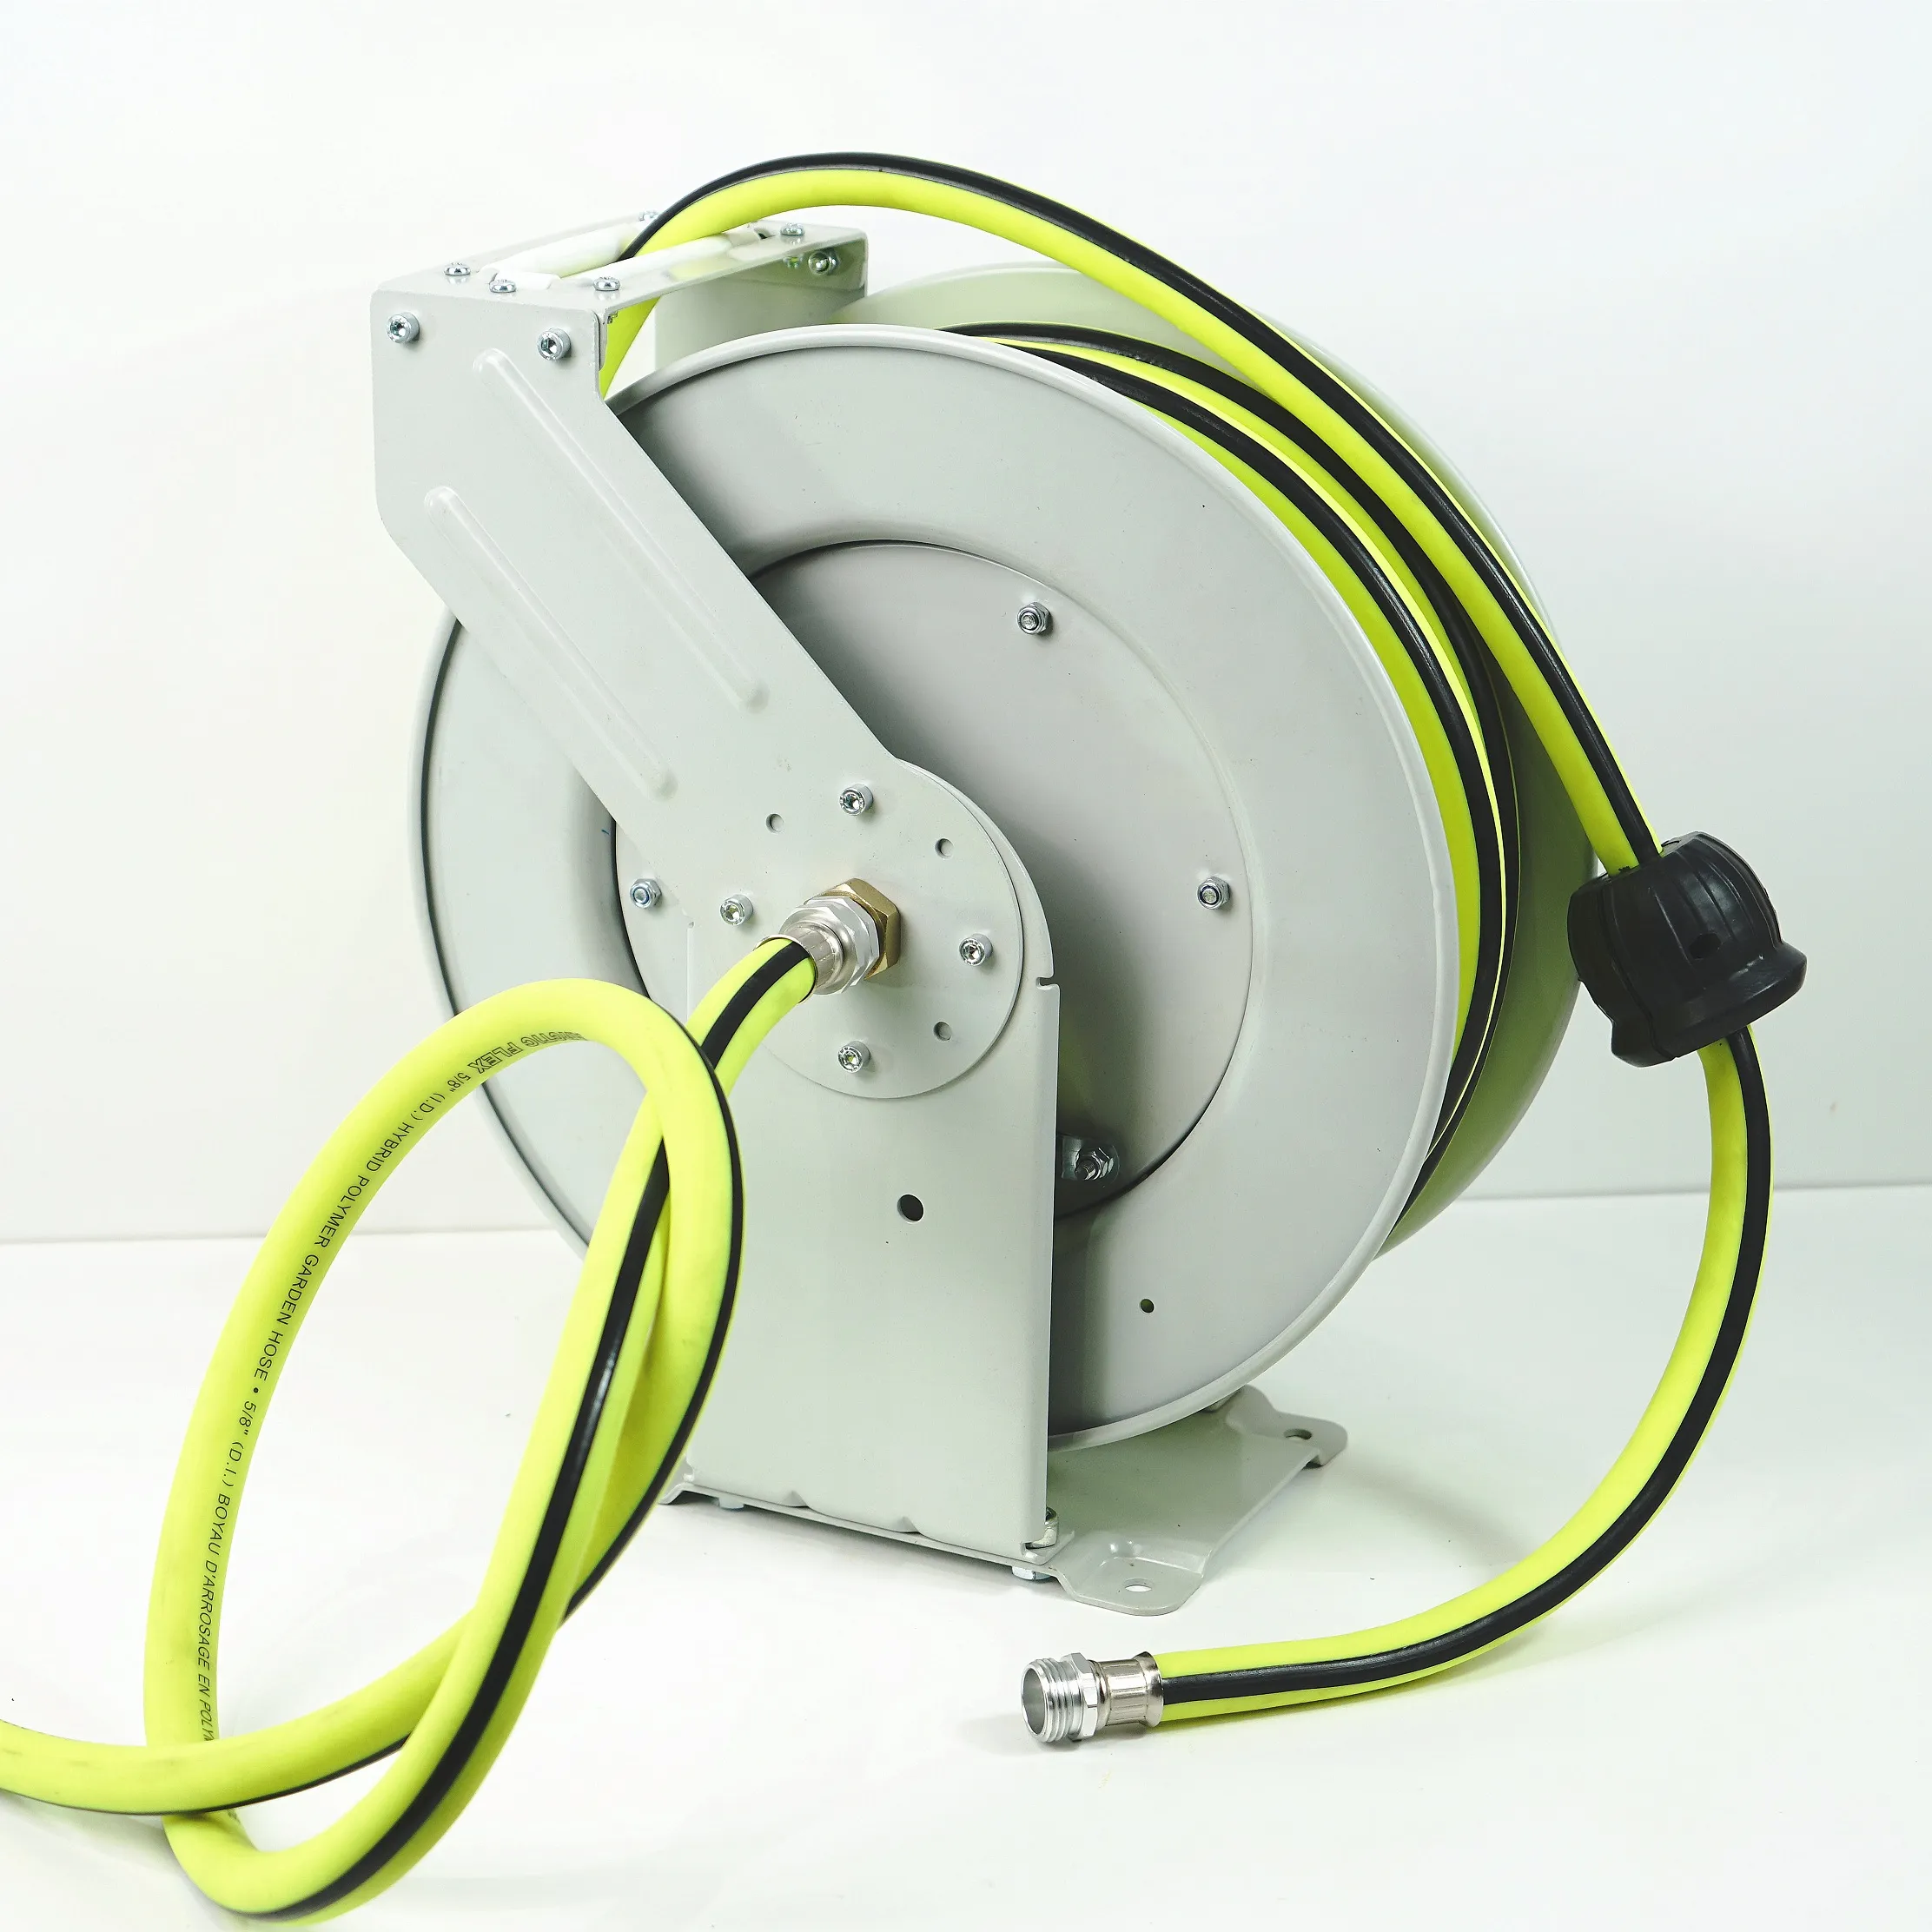 NEW 50 Feet Expandable Retractable Garden Hose Reel Watering Hose Anti Rust Garden Hose Reel Soft Black Yellow Green Red Blue